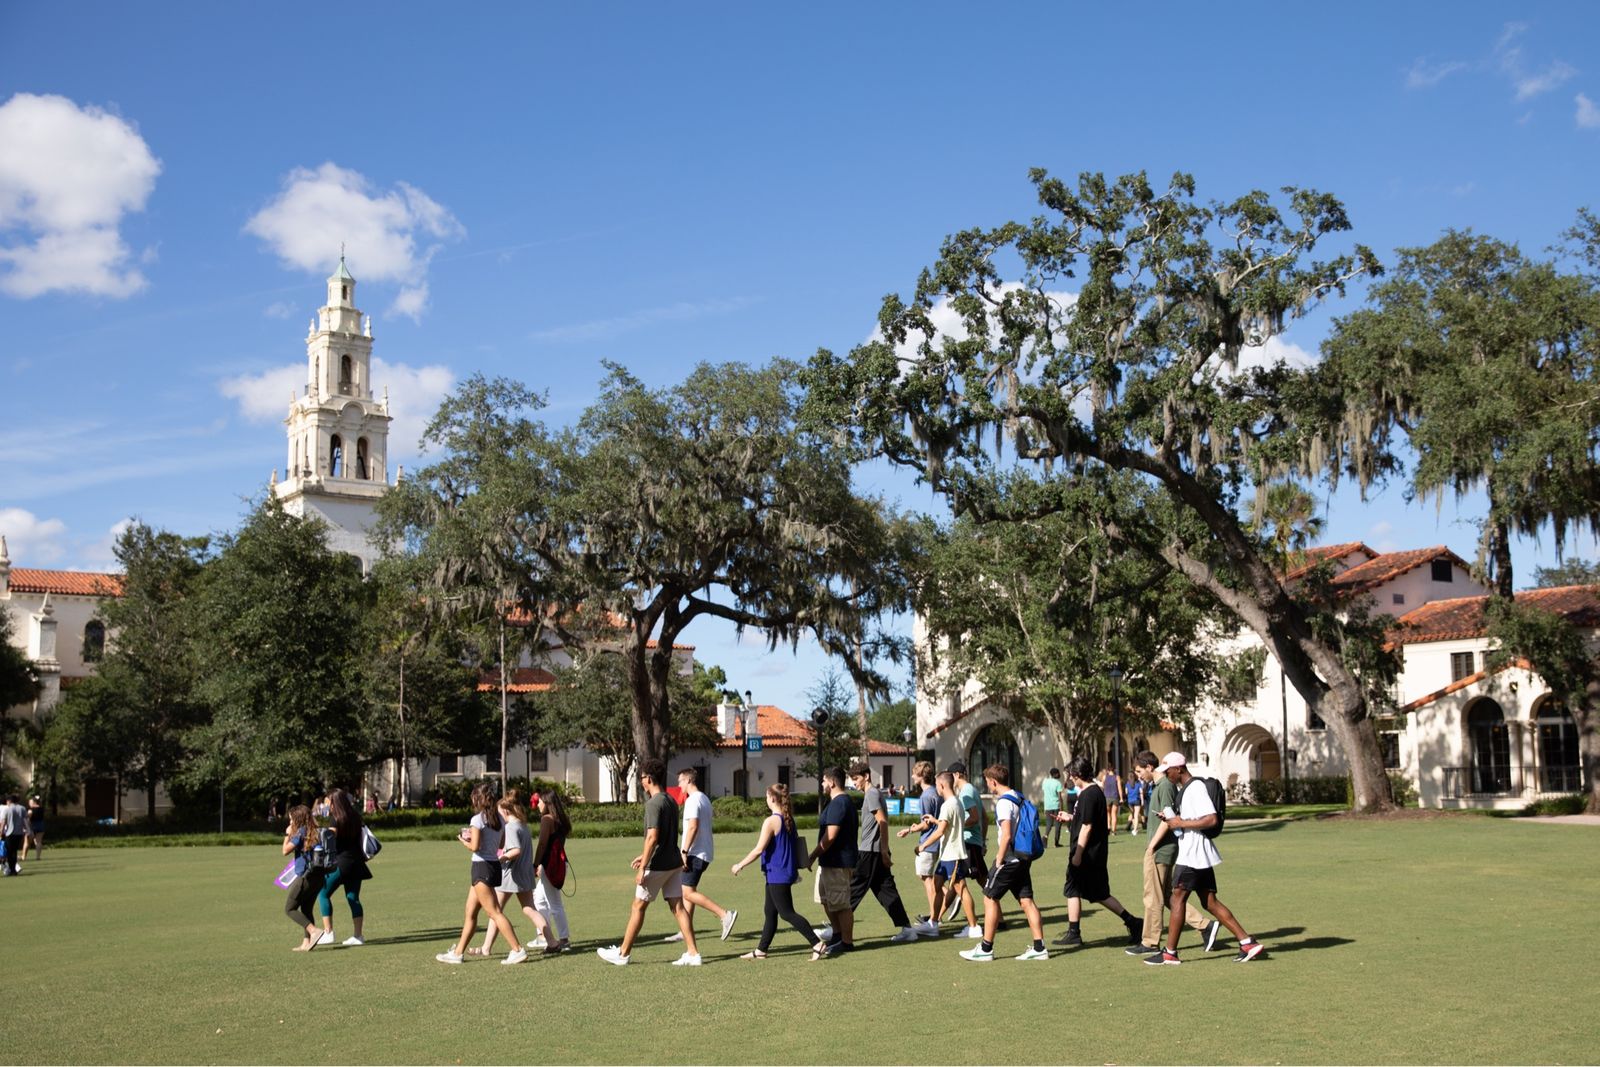 InPerson Campus Tours of Rollins College